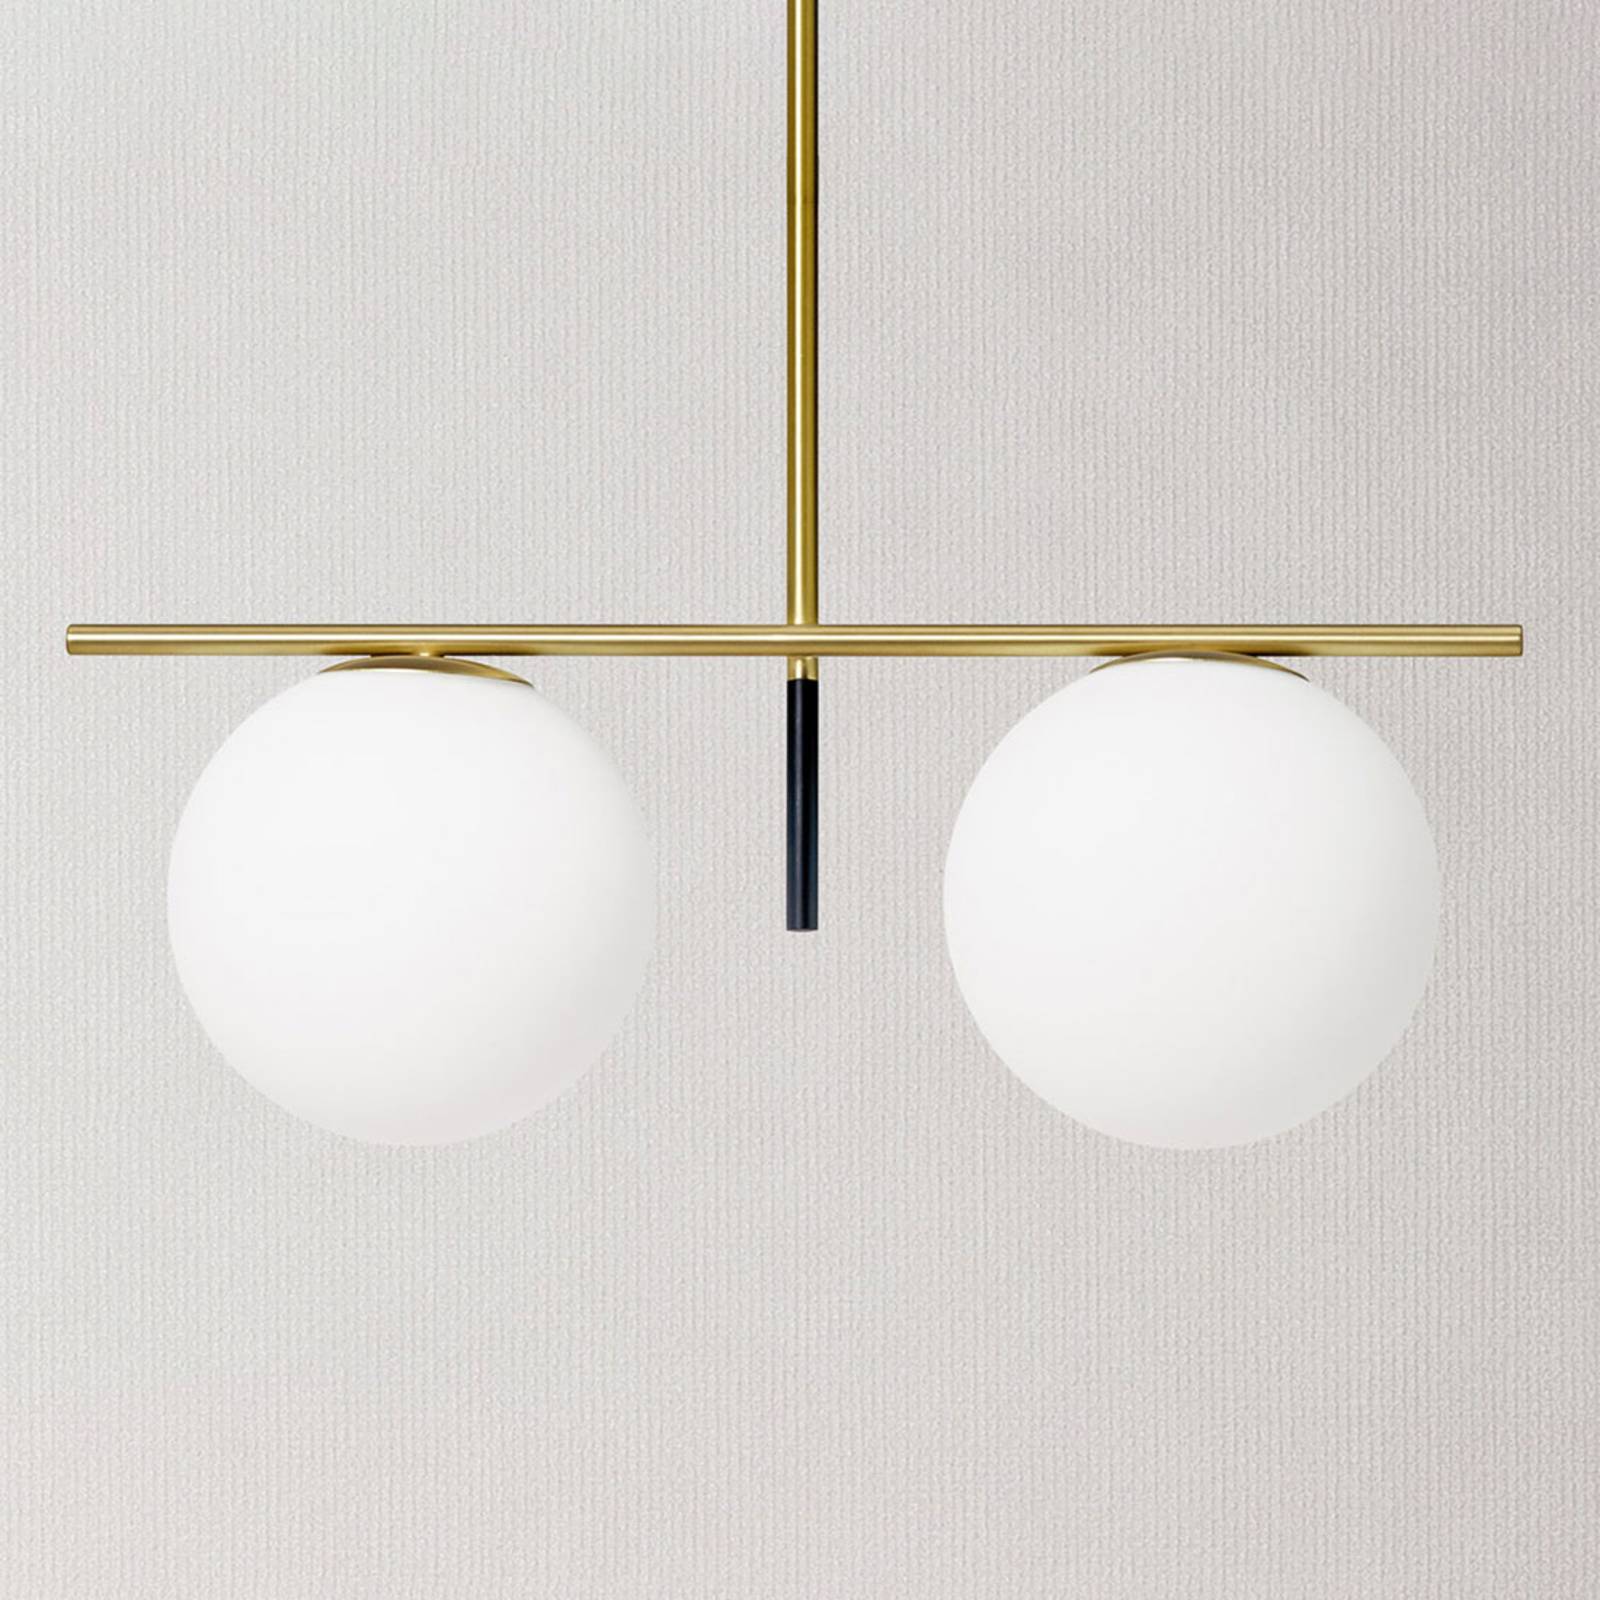 Image of miloox by Sforzin Suspension Jugen, or, à 2 lampes 8050612942603